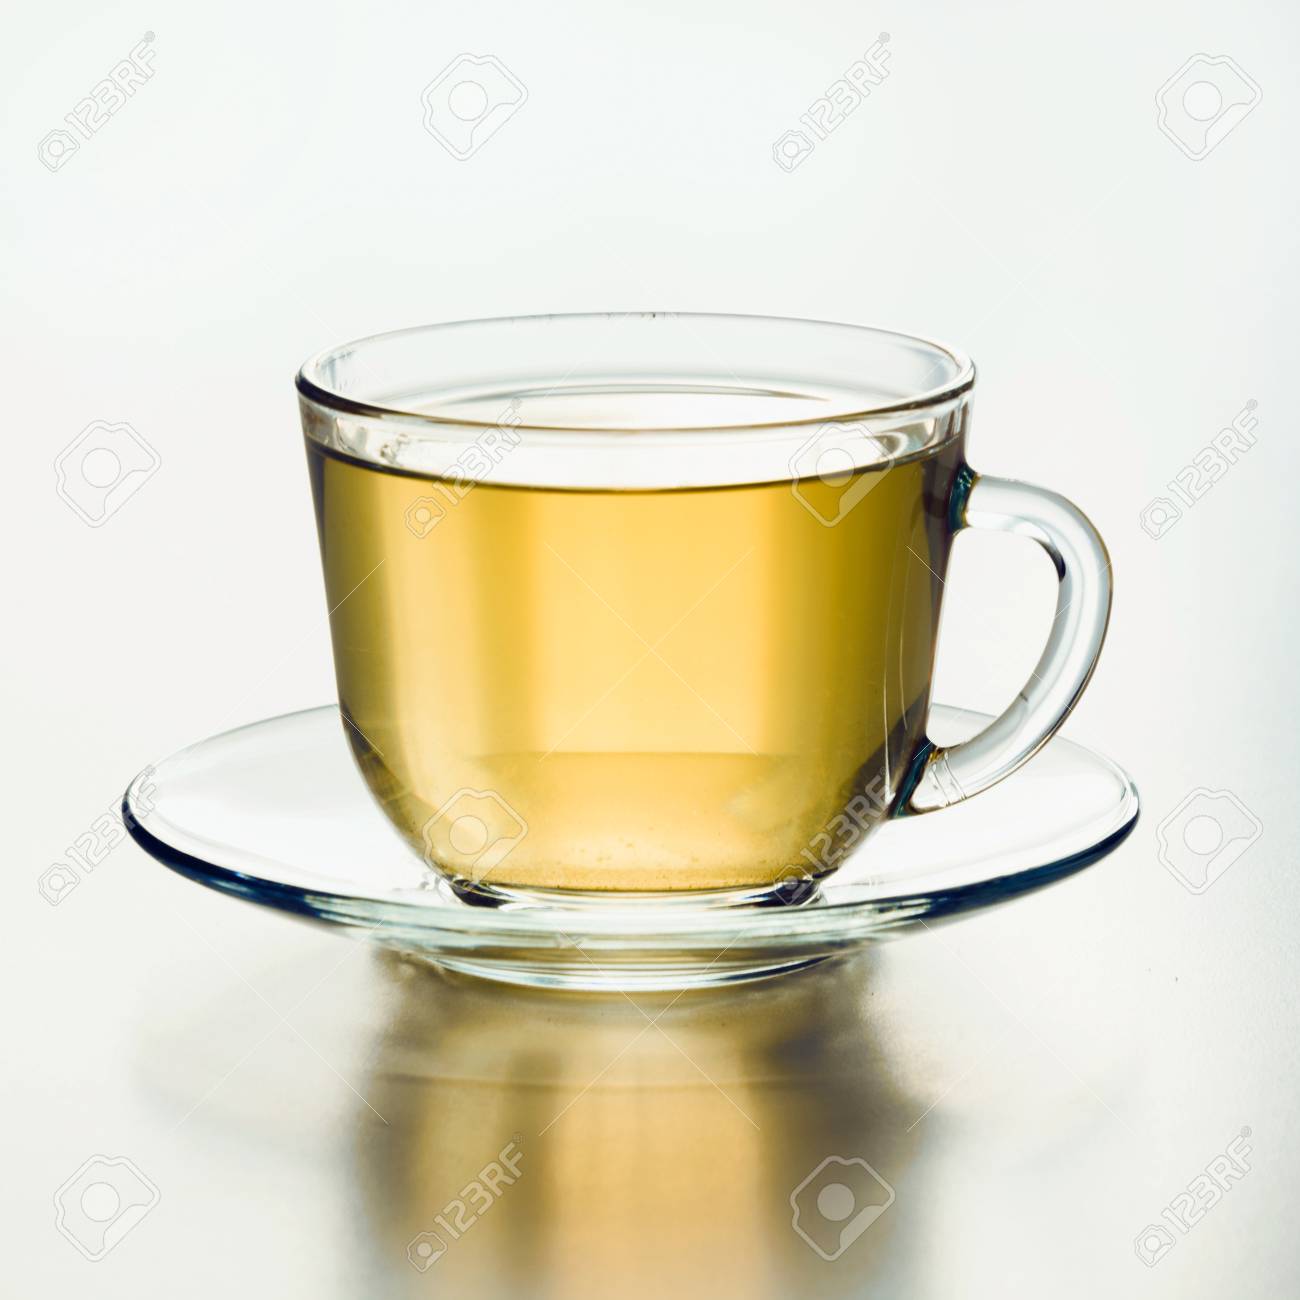 94525172-glass-cup-of-green-tea-close-up-square-image-.jpg